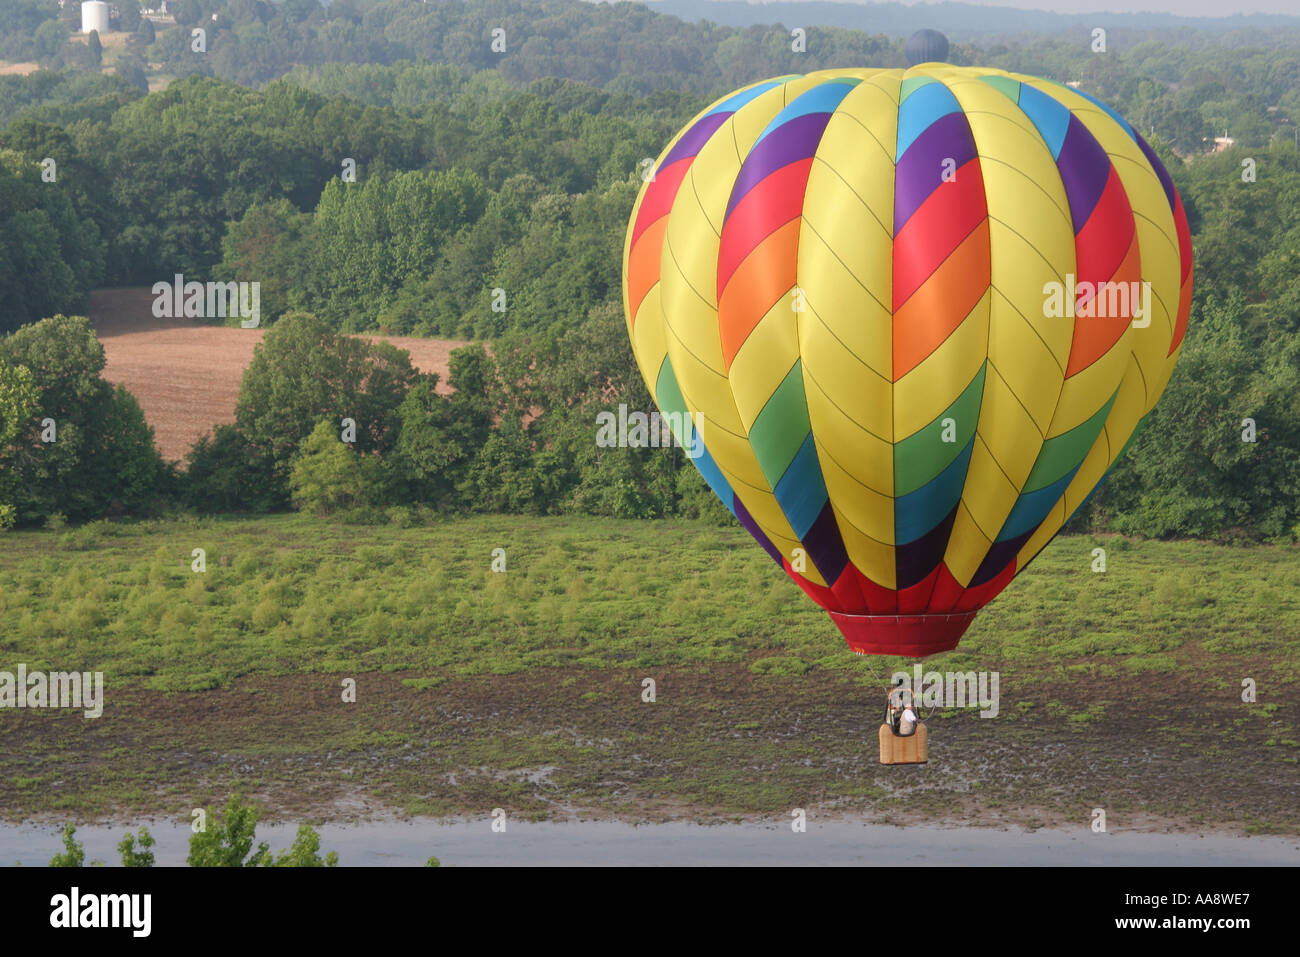 Alabama Morgan County,Decatur,Point Mallard Park,Alabama Jubilee Hot Air Balloon Classic,flight,aerial overhead view from above,view,estuary,wildlife, Stock Photo